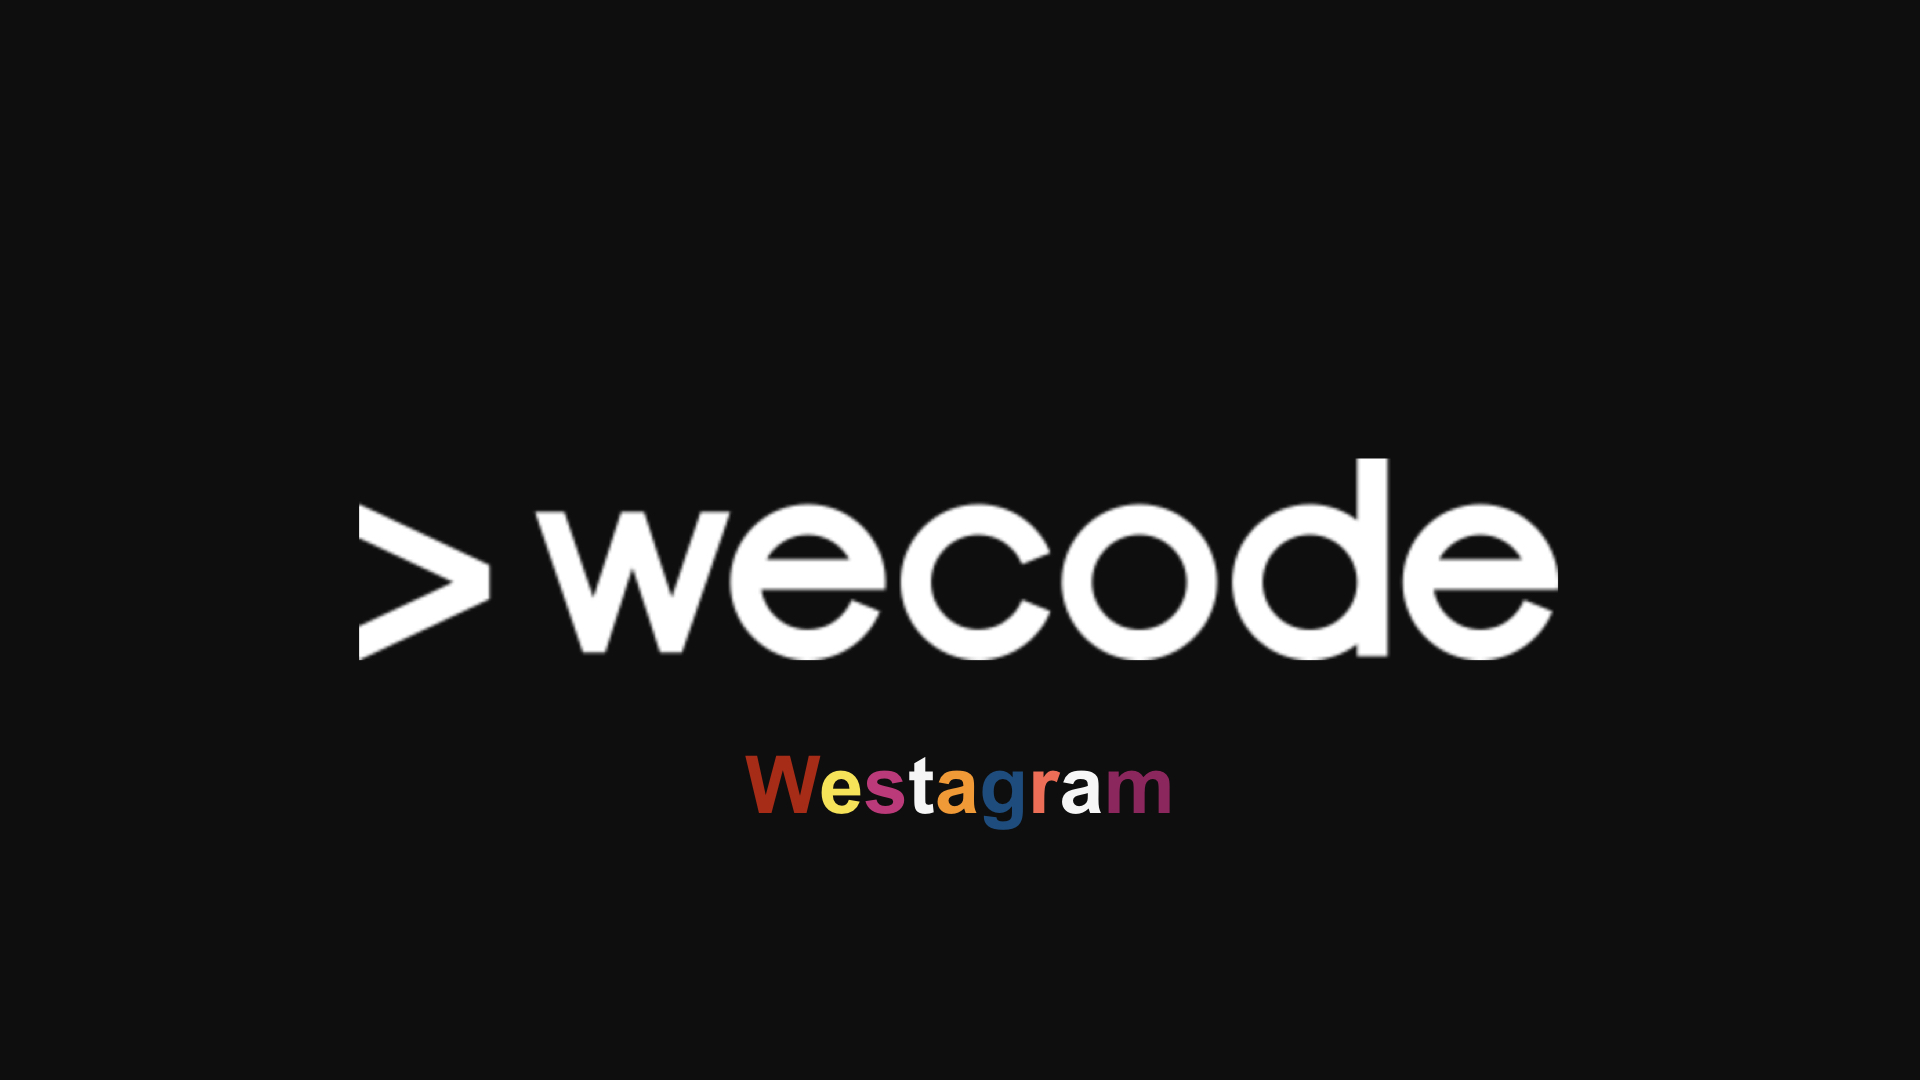 [ PROJECT ] Westagram endpoint 구현